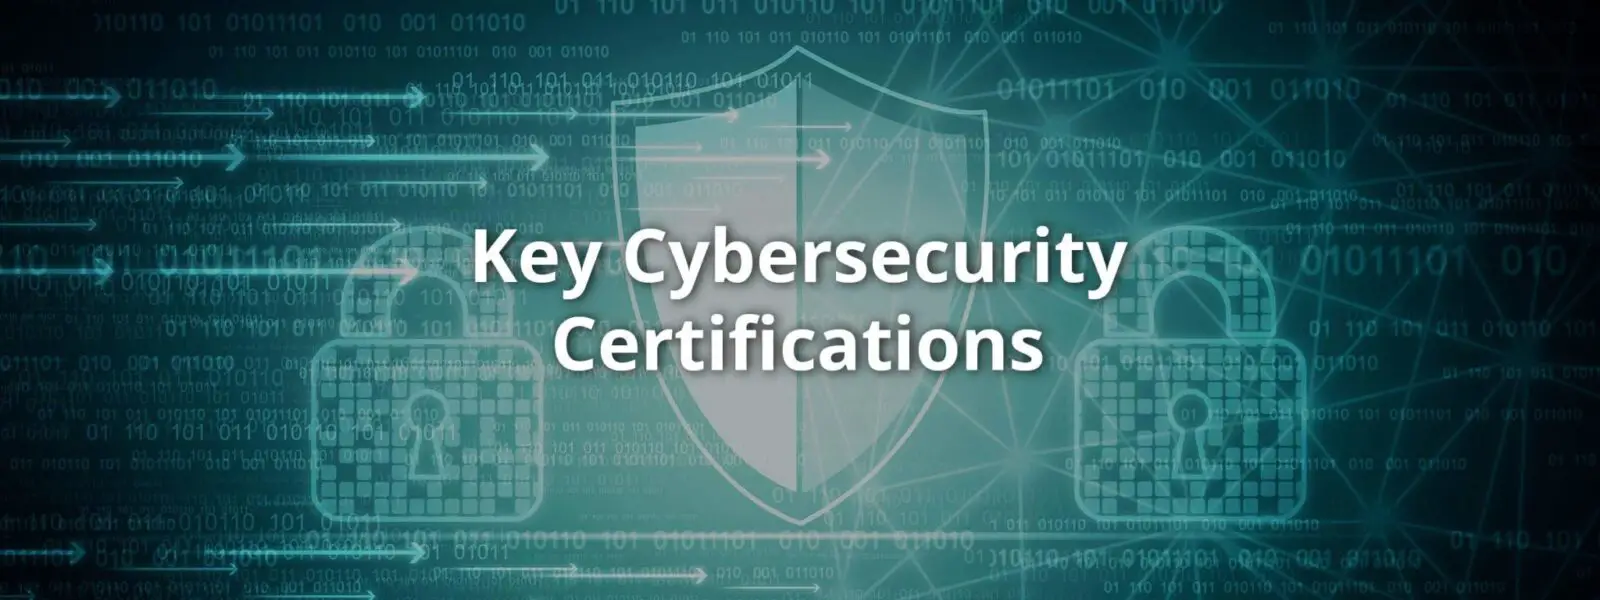 Cybersecurity Certifications You Need to Do